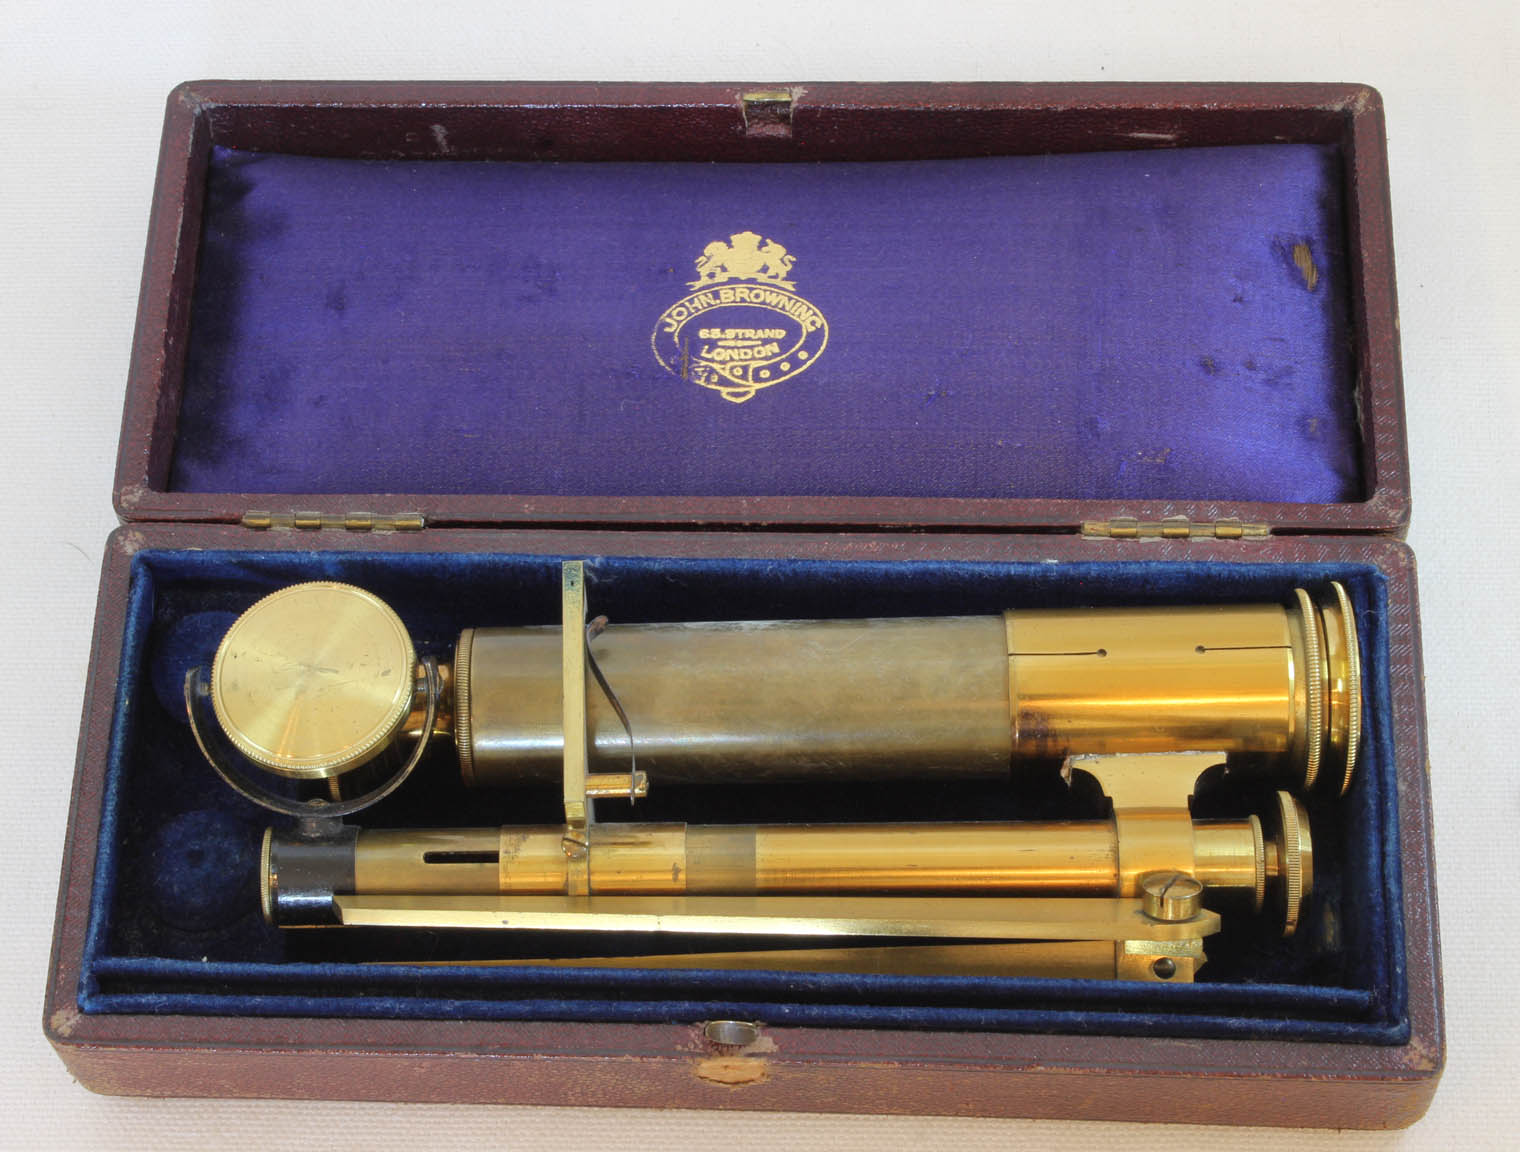 Browning Portable Microscope in case